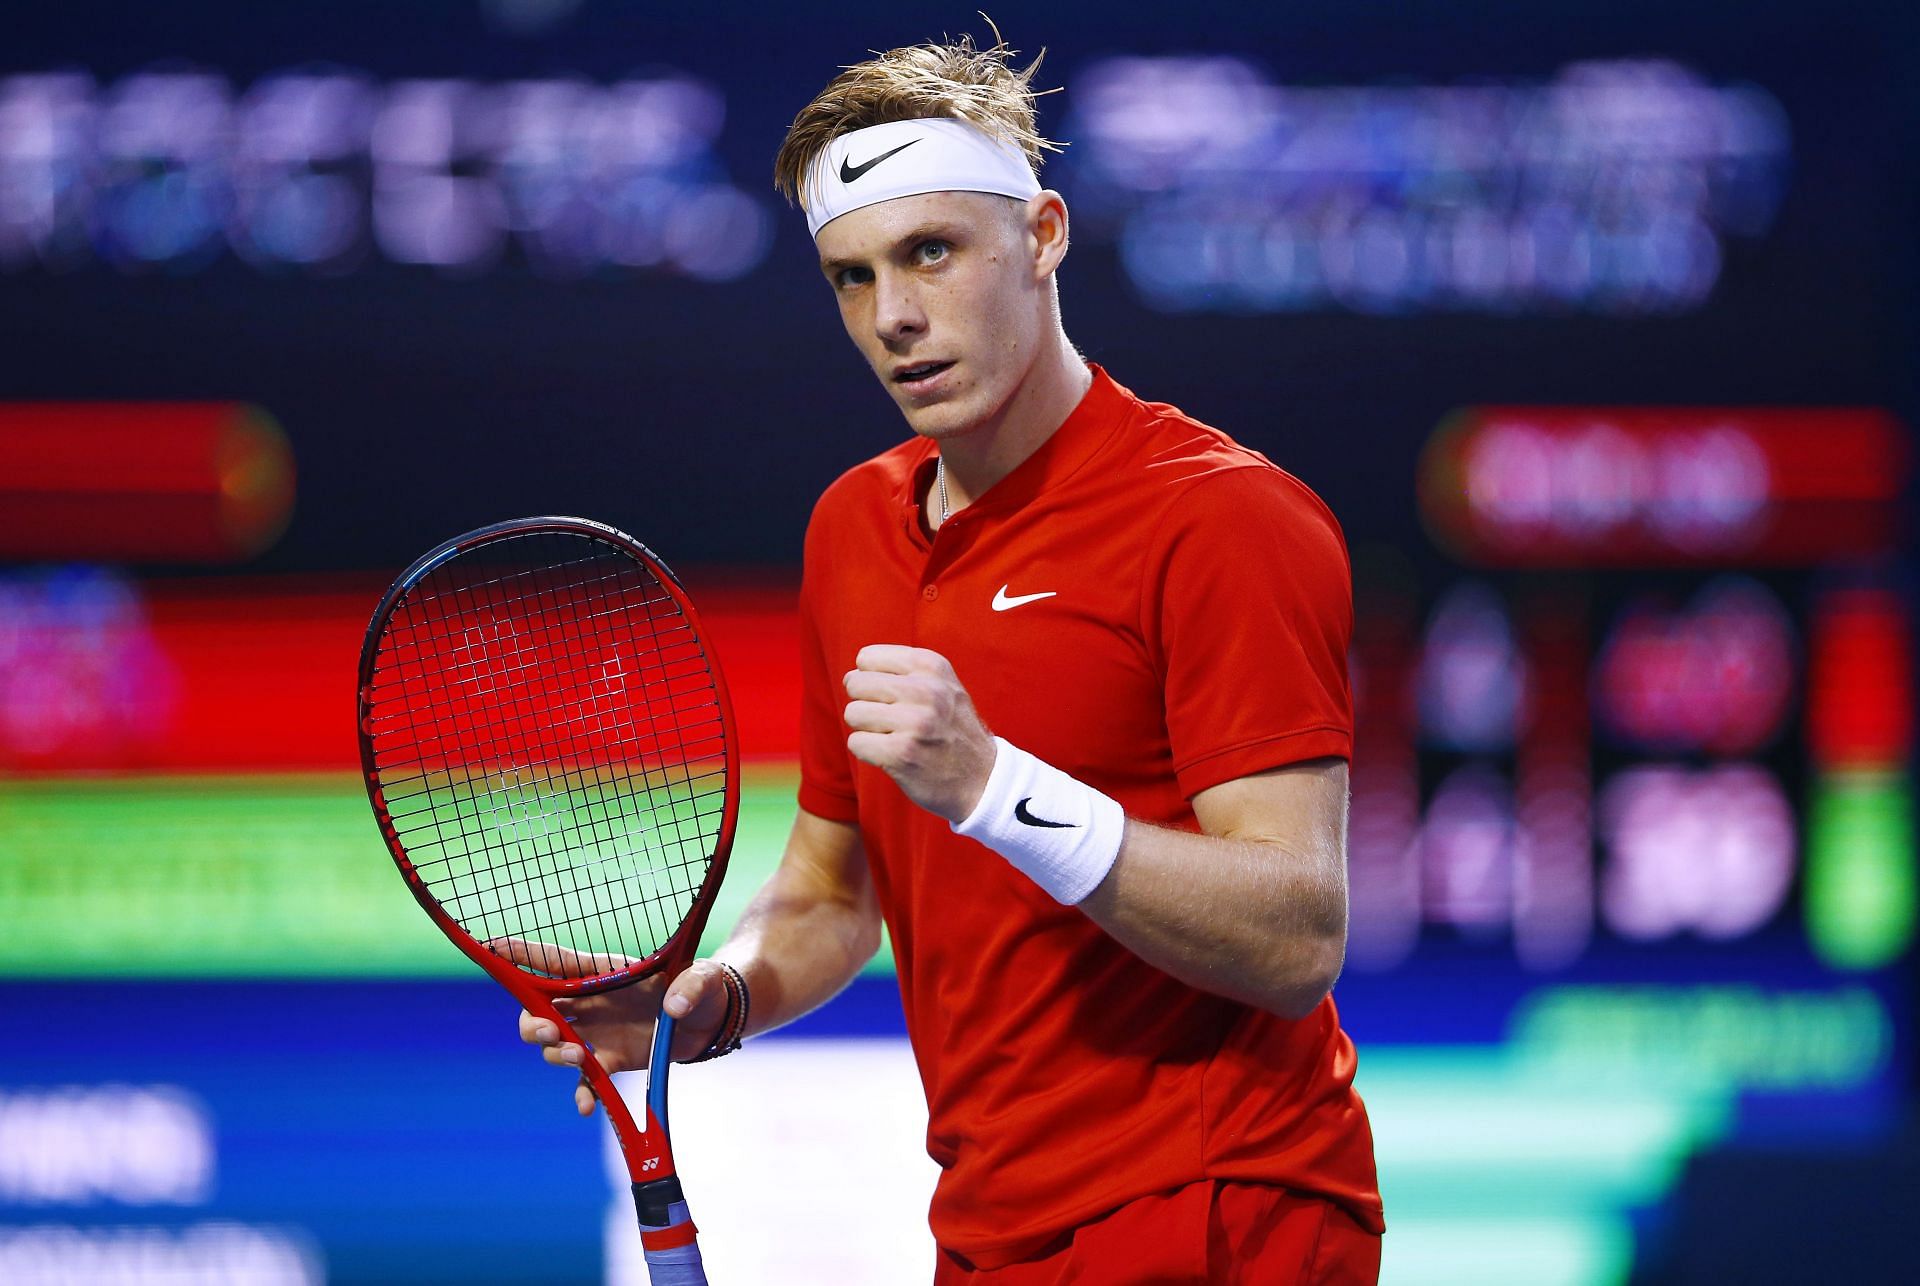 Denis Shapovalov is out of COVID-19 isolation